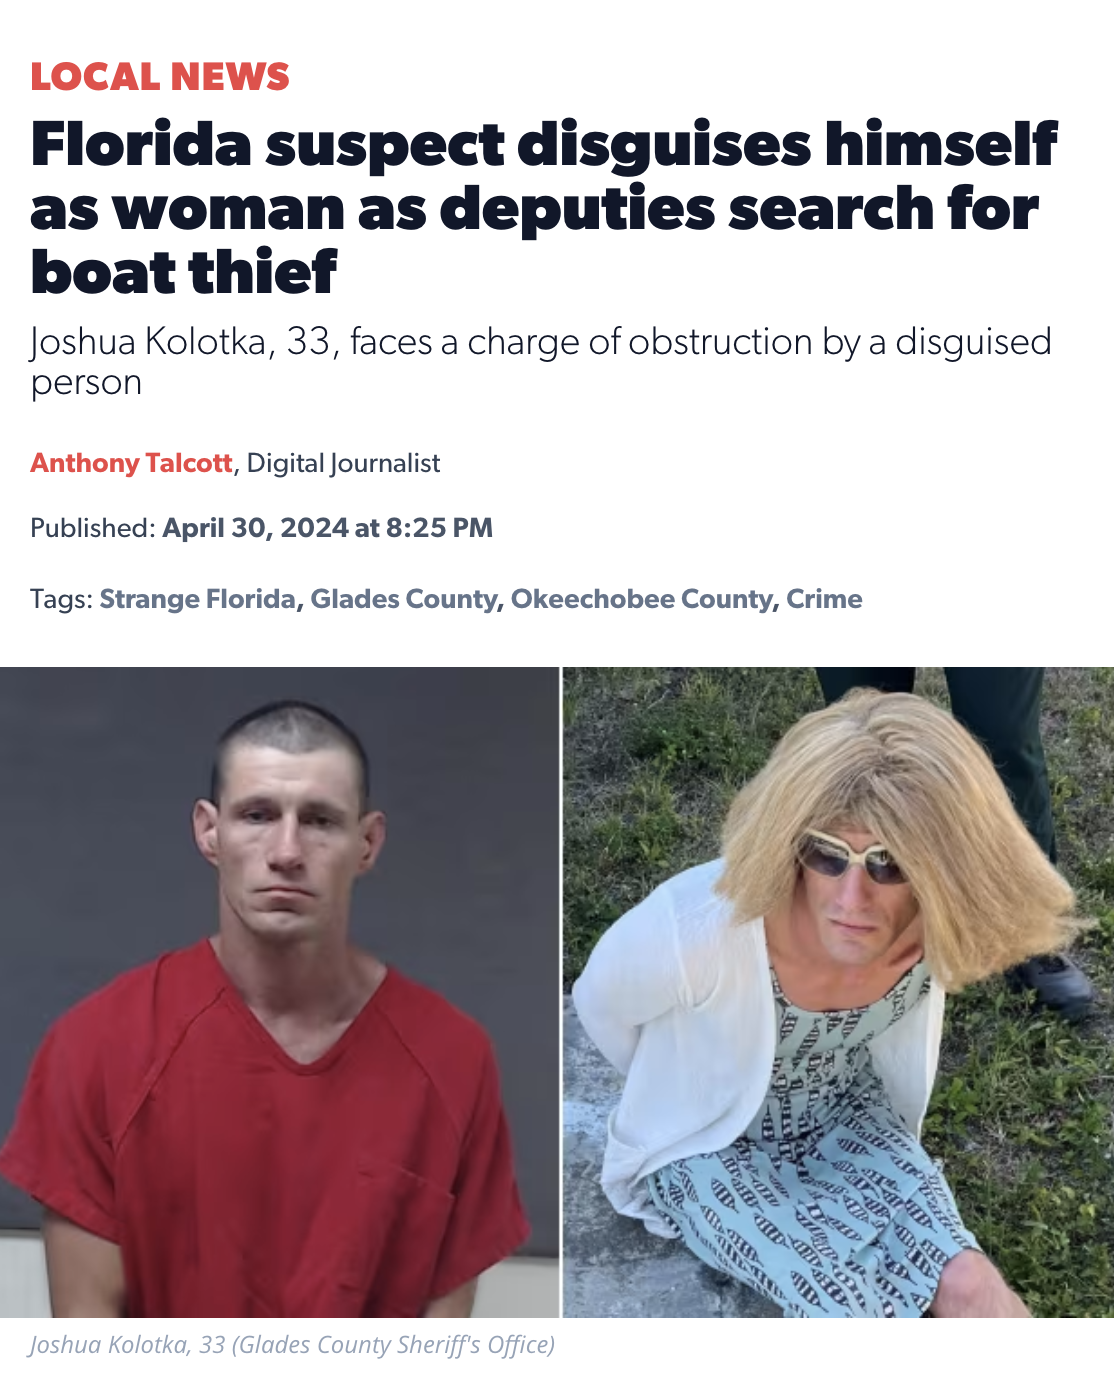 florida man disguises himself as lady to escape deputies - Local News Florida suspect disguises himself as woman as deputies search for boat thief Joshua Kolotka, 33, faces a charge of obstruction by a disguised person Anthony Talcott, Digital Journalist 